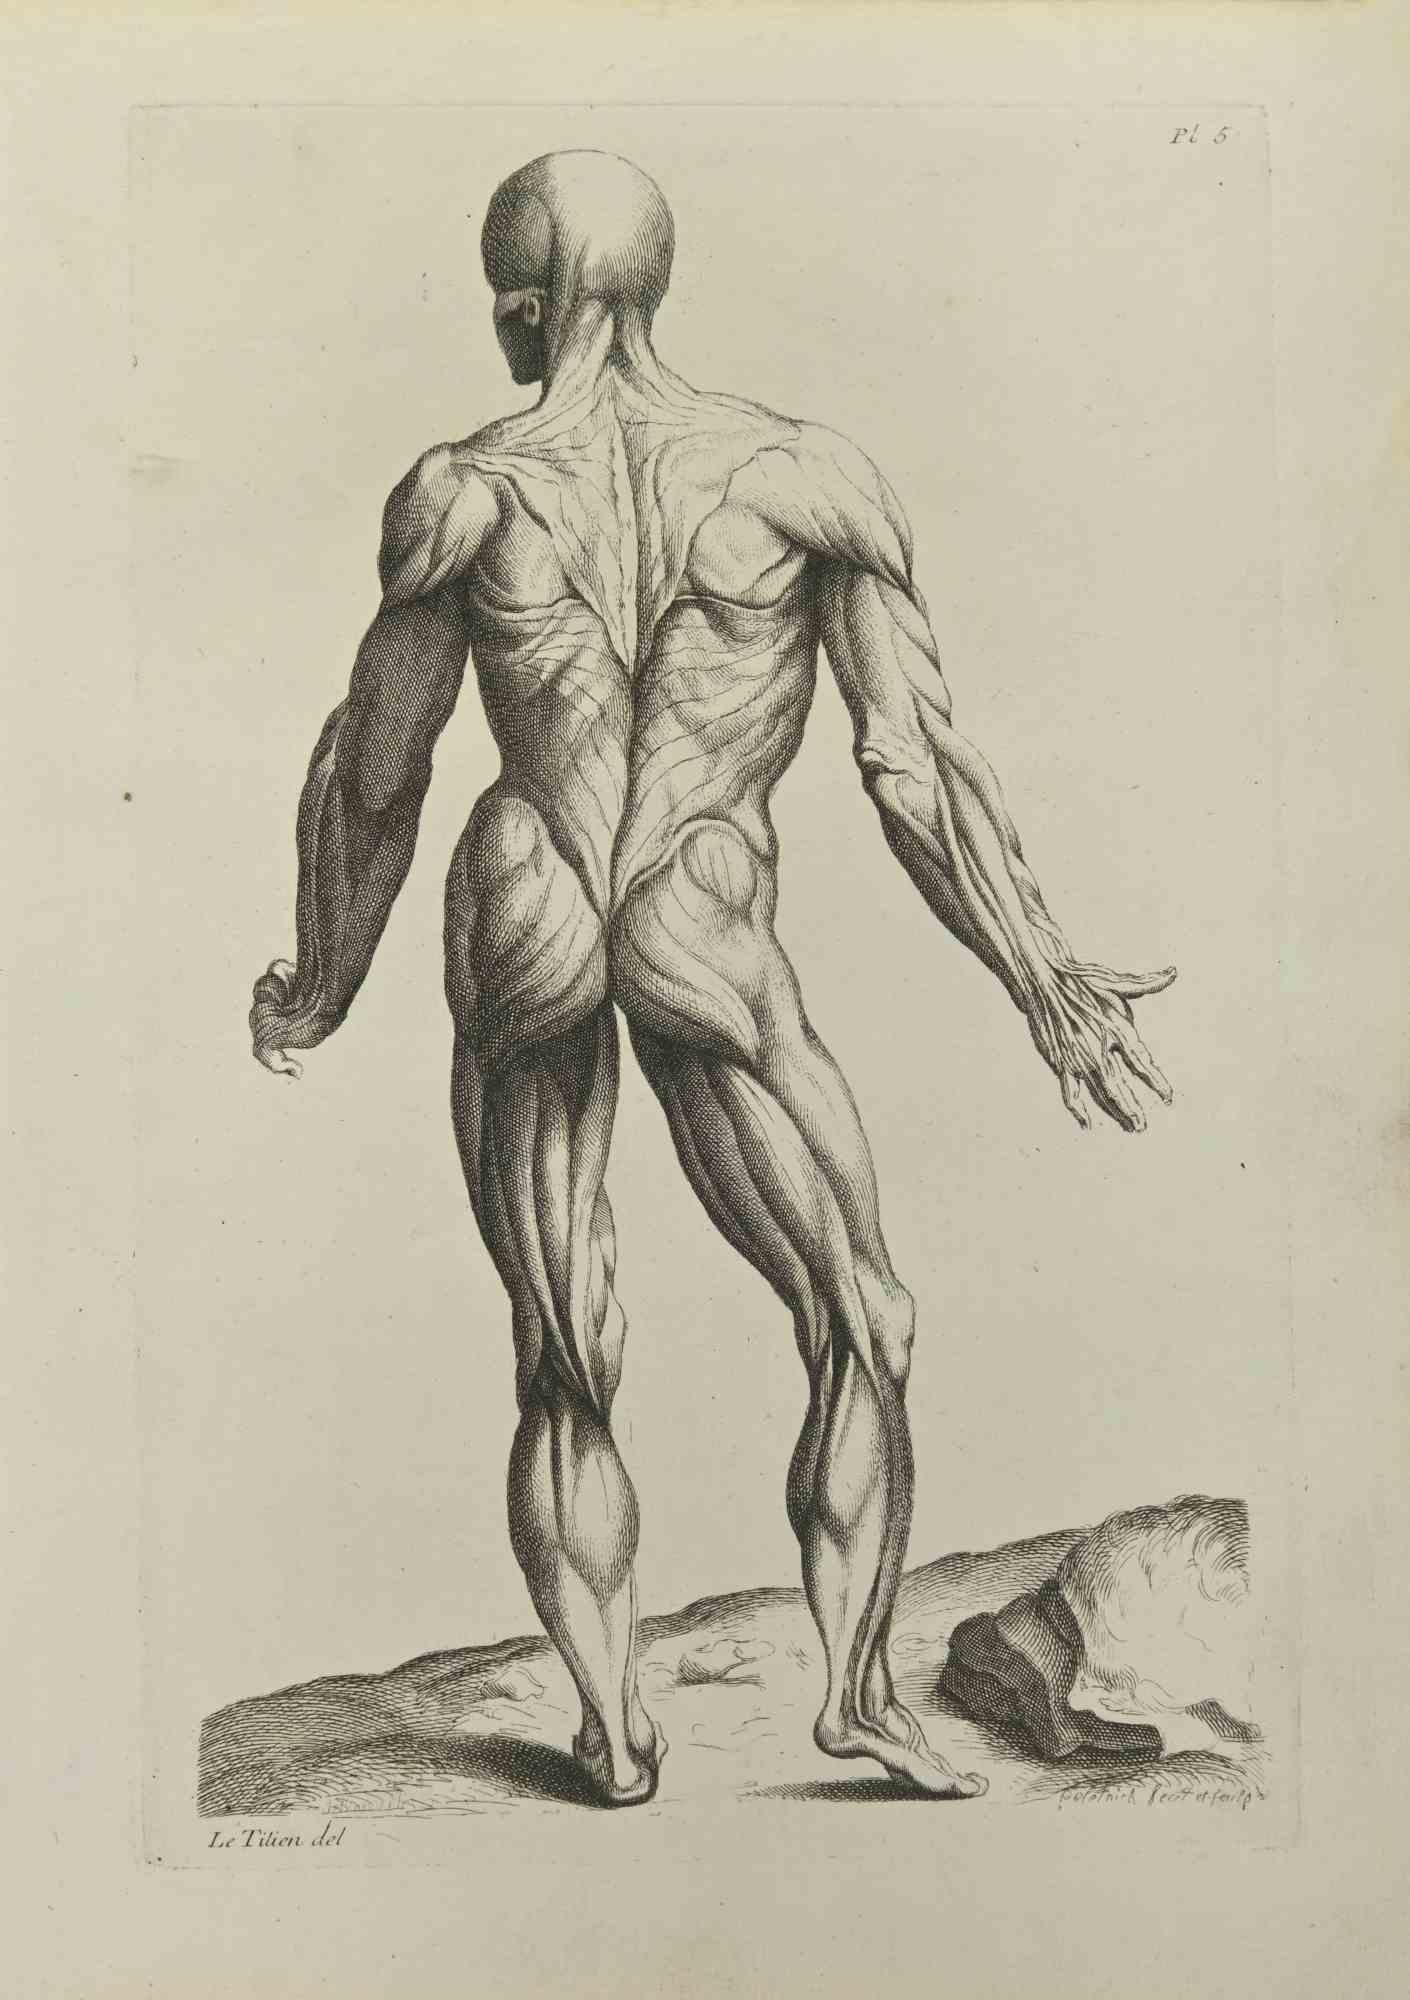 Anatomy Studies Muscles  after Titian is an etching realized by Jean Francois Poletnich in 1755.

Signed in the plate.

Good conditions with foxing.

The artwork is depicted through confident strokes.

The etching was realized for the anatomy study